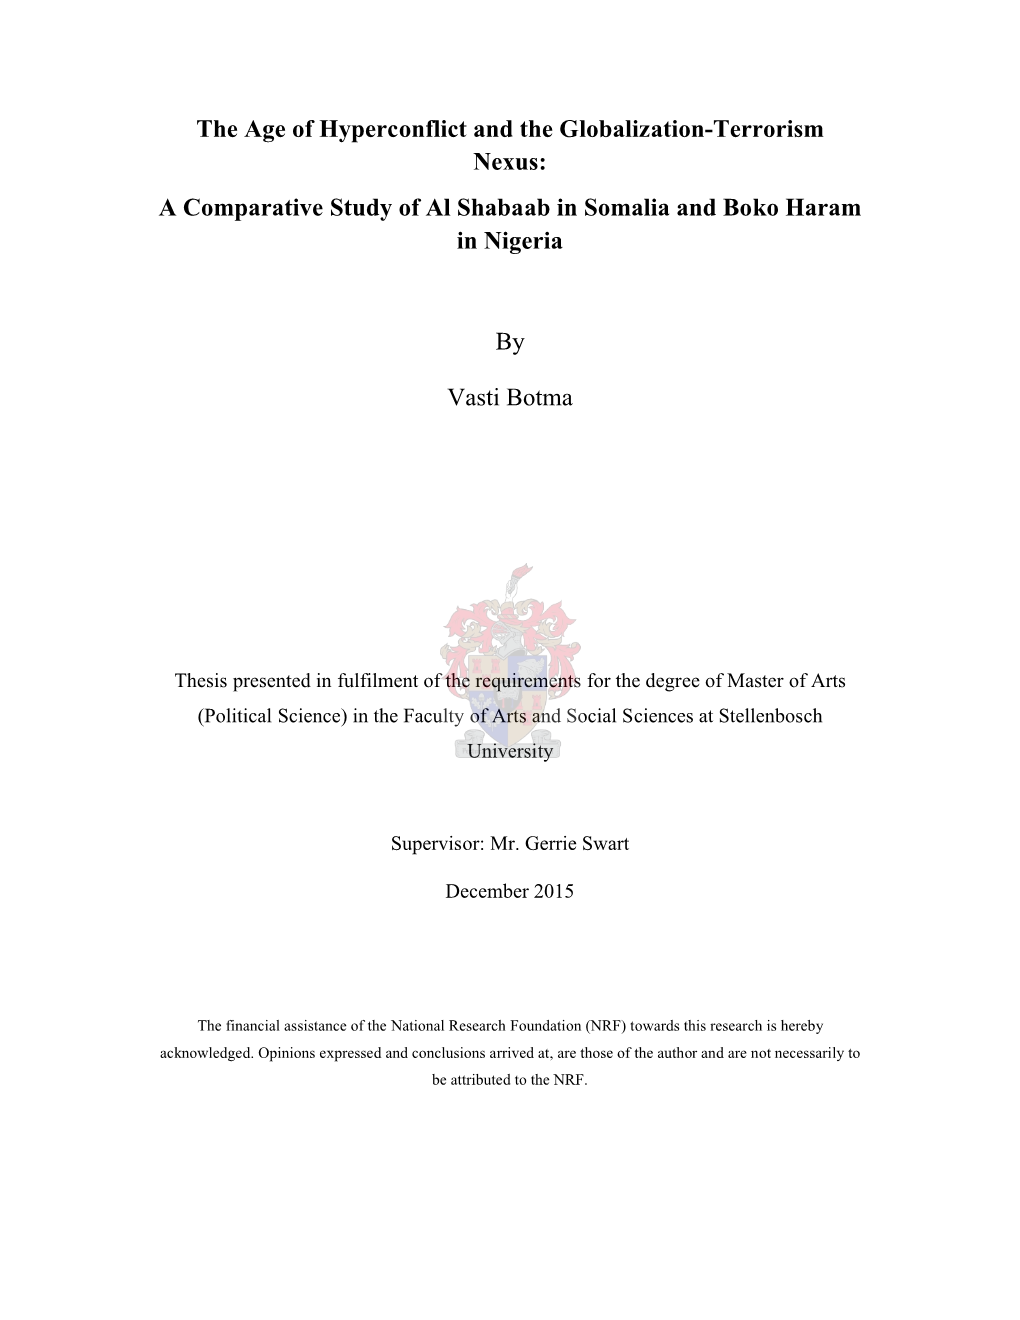 The Age of Hyperconflict and the Globalization-Terrorism Nexus: a Comparative Study of Al Shabaab in Somalia and Boko Haram in Nigeria